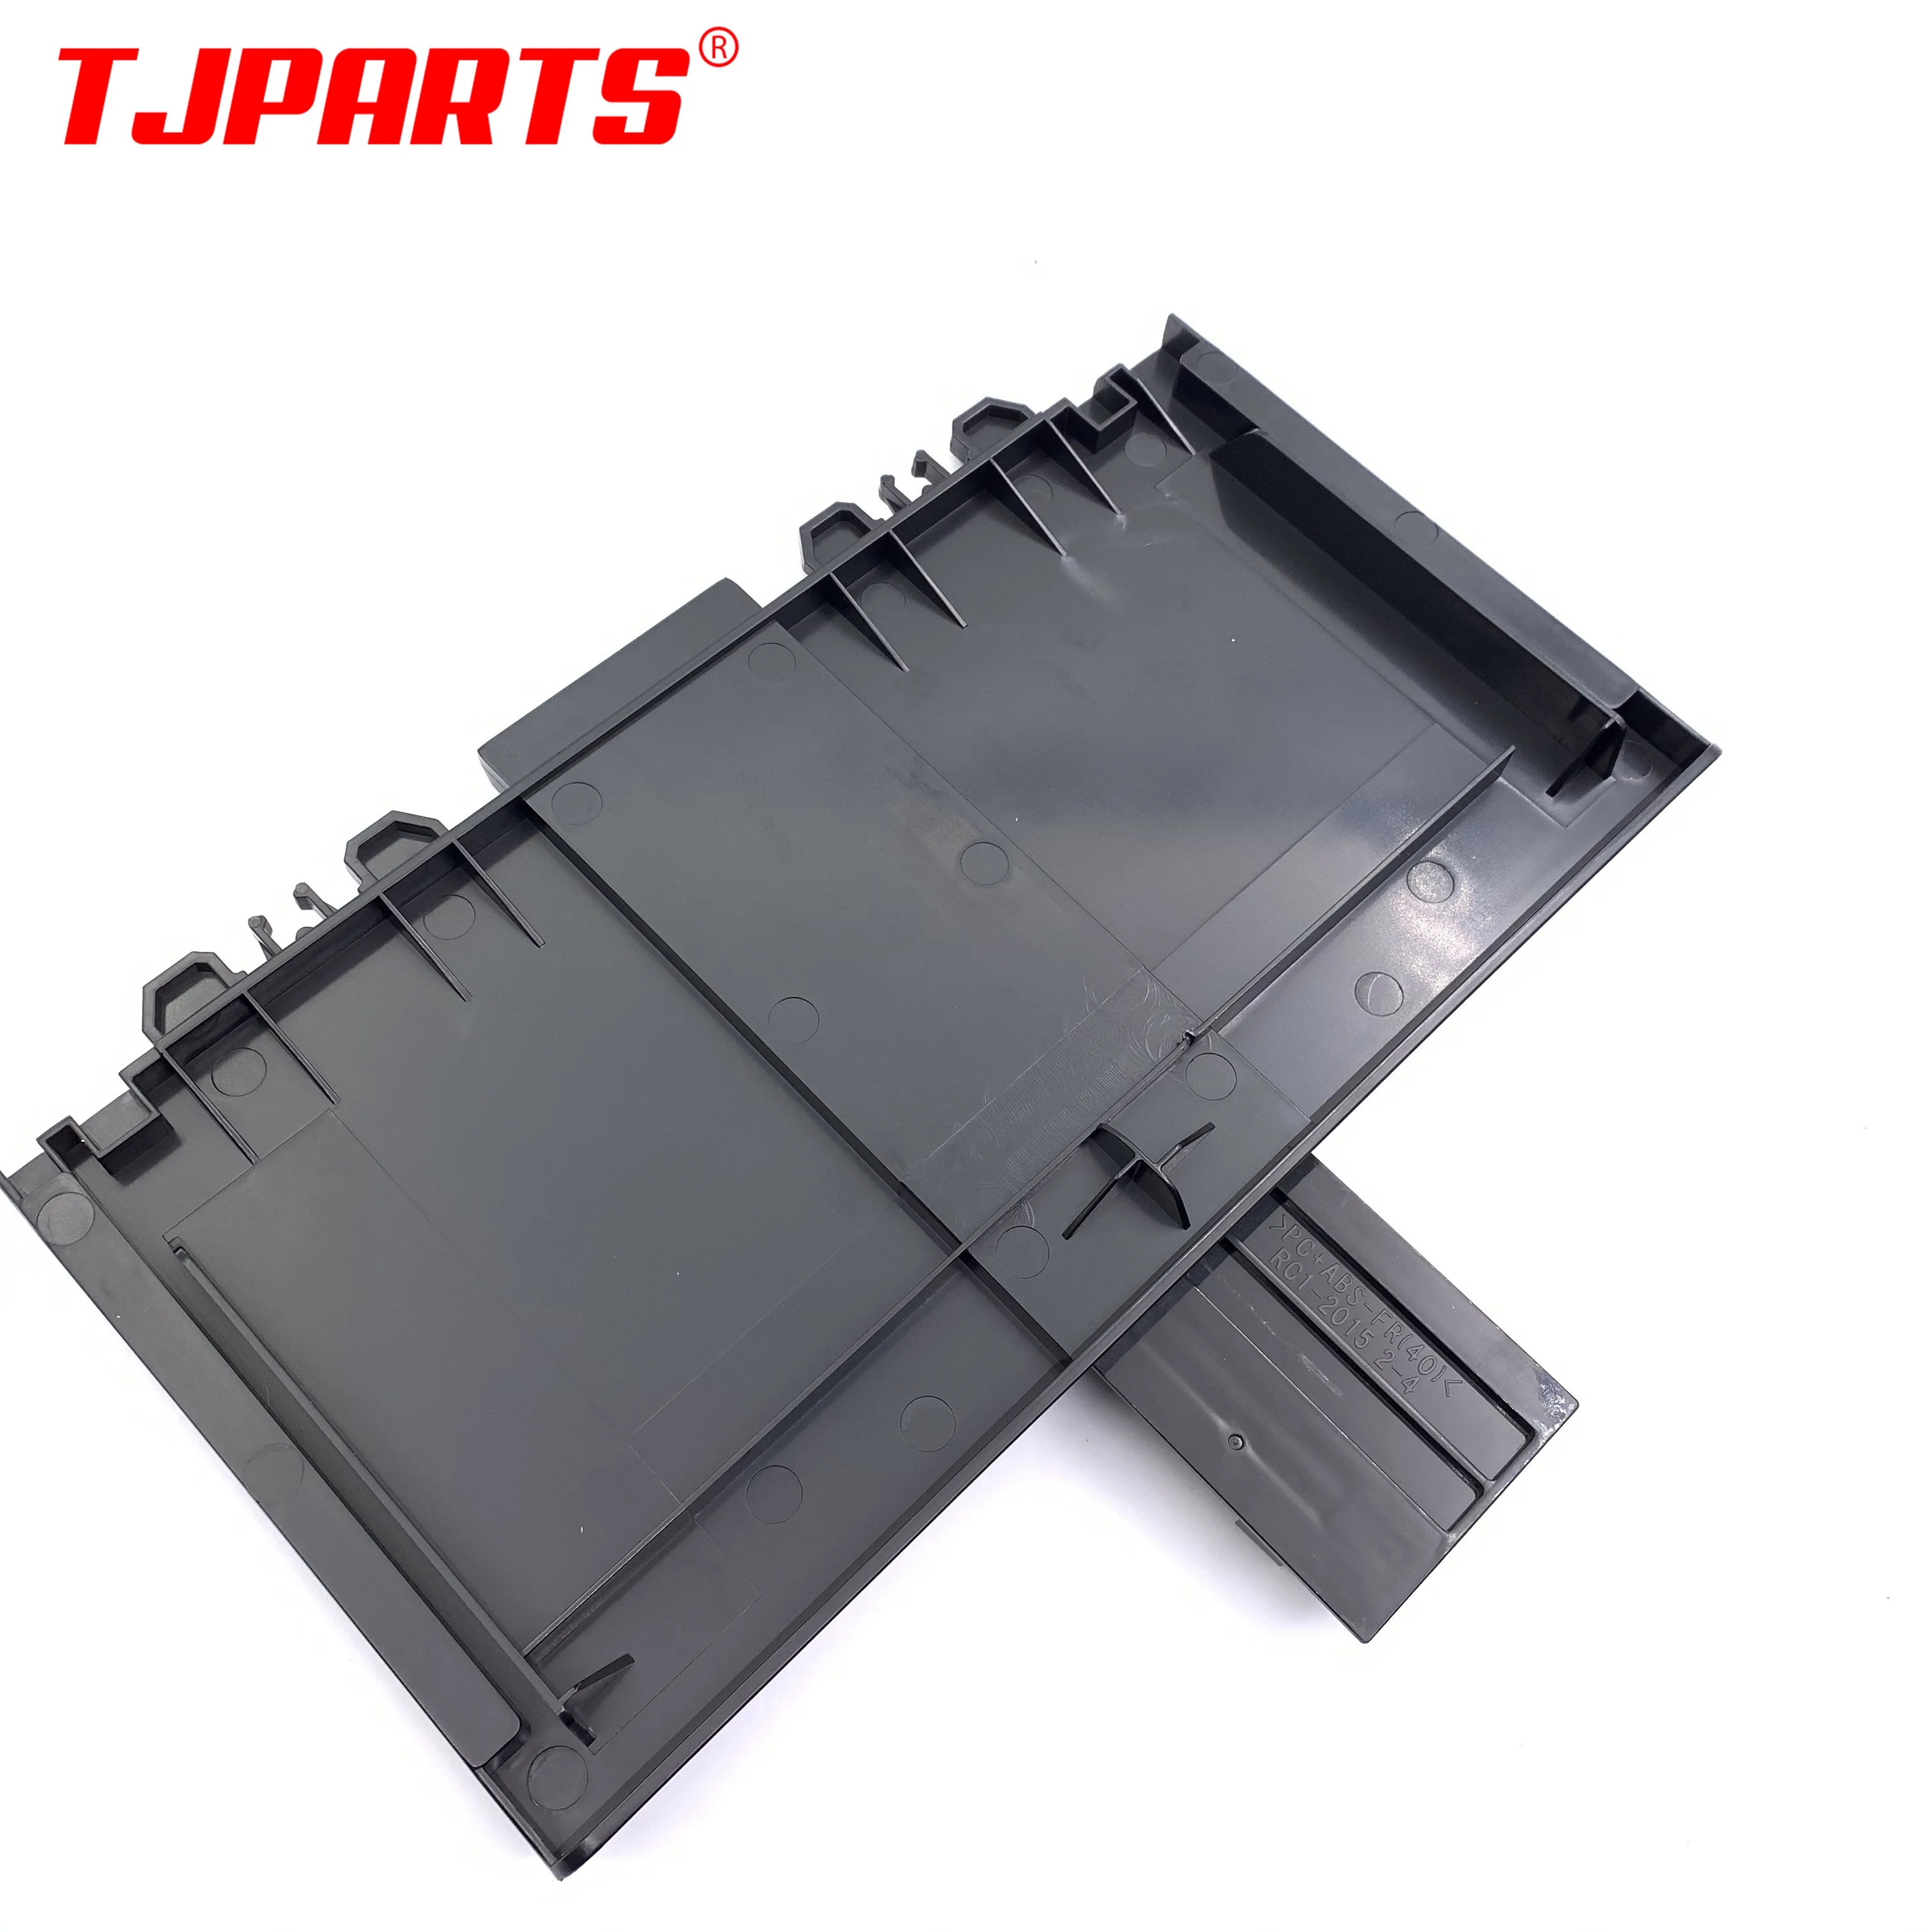 

1PC X RM1-9677-000CN Paper Pickup Input Tray Assembly for HP Pro M201n M201dw M202n M225dn M225dw M226dn M201 M202 M225 M226